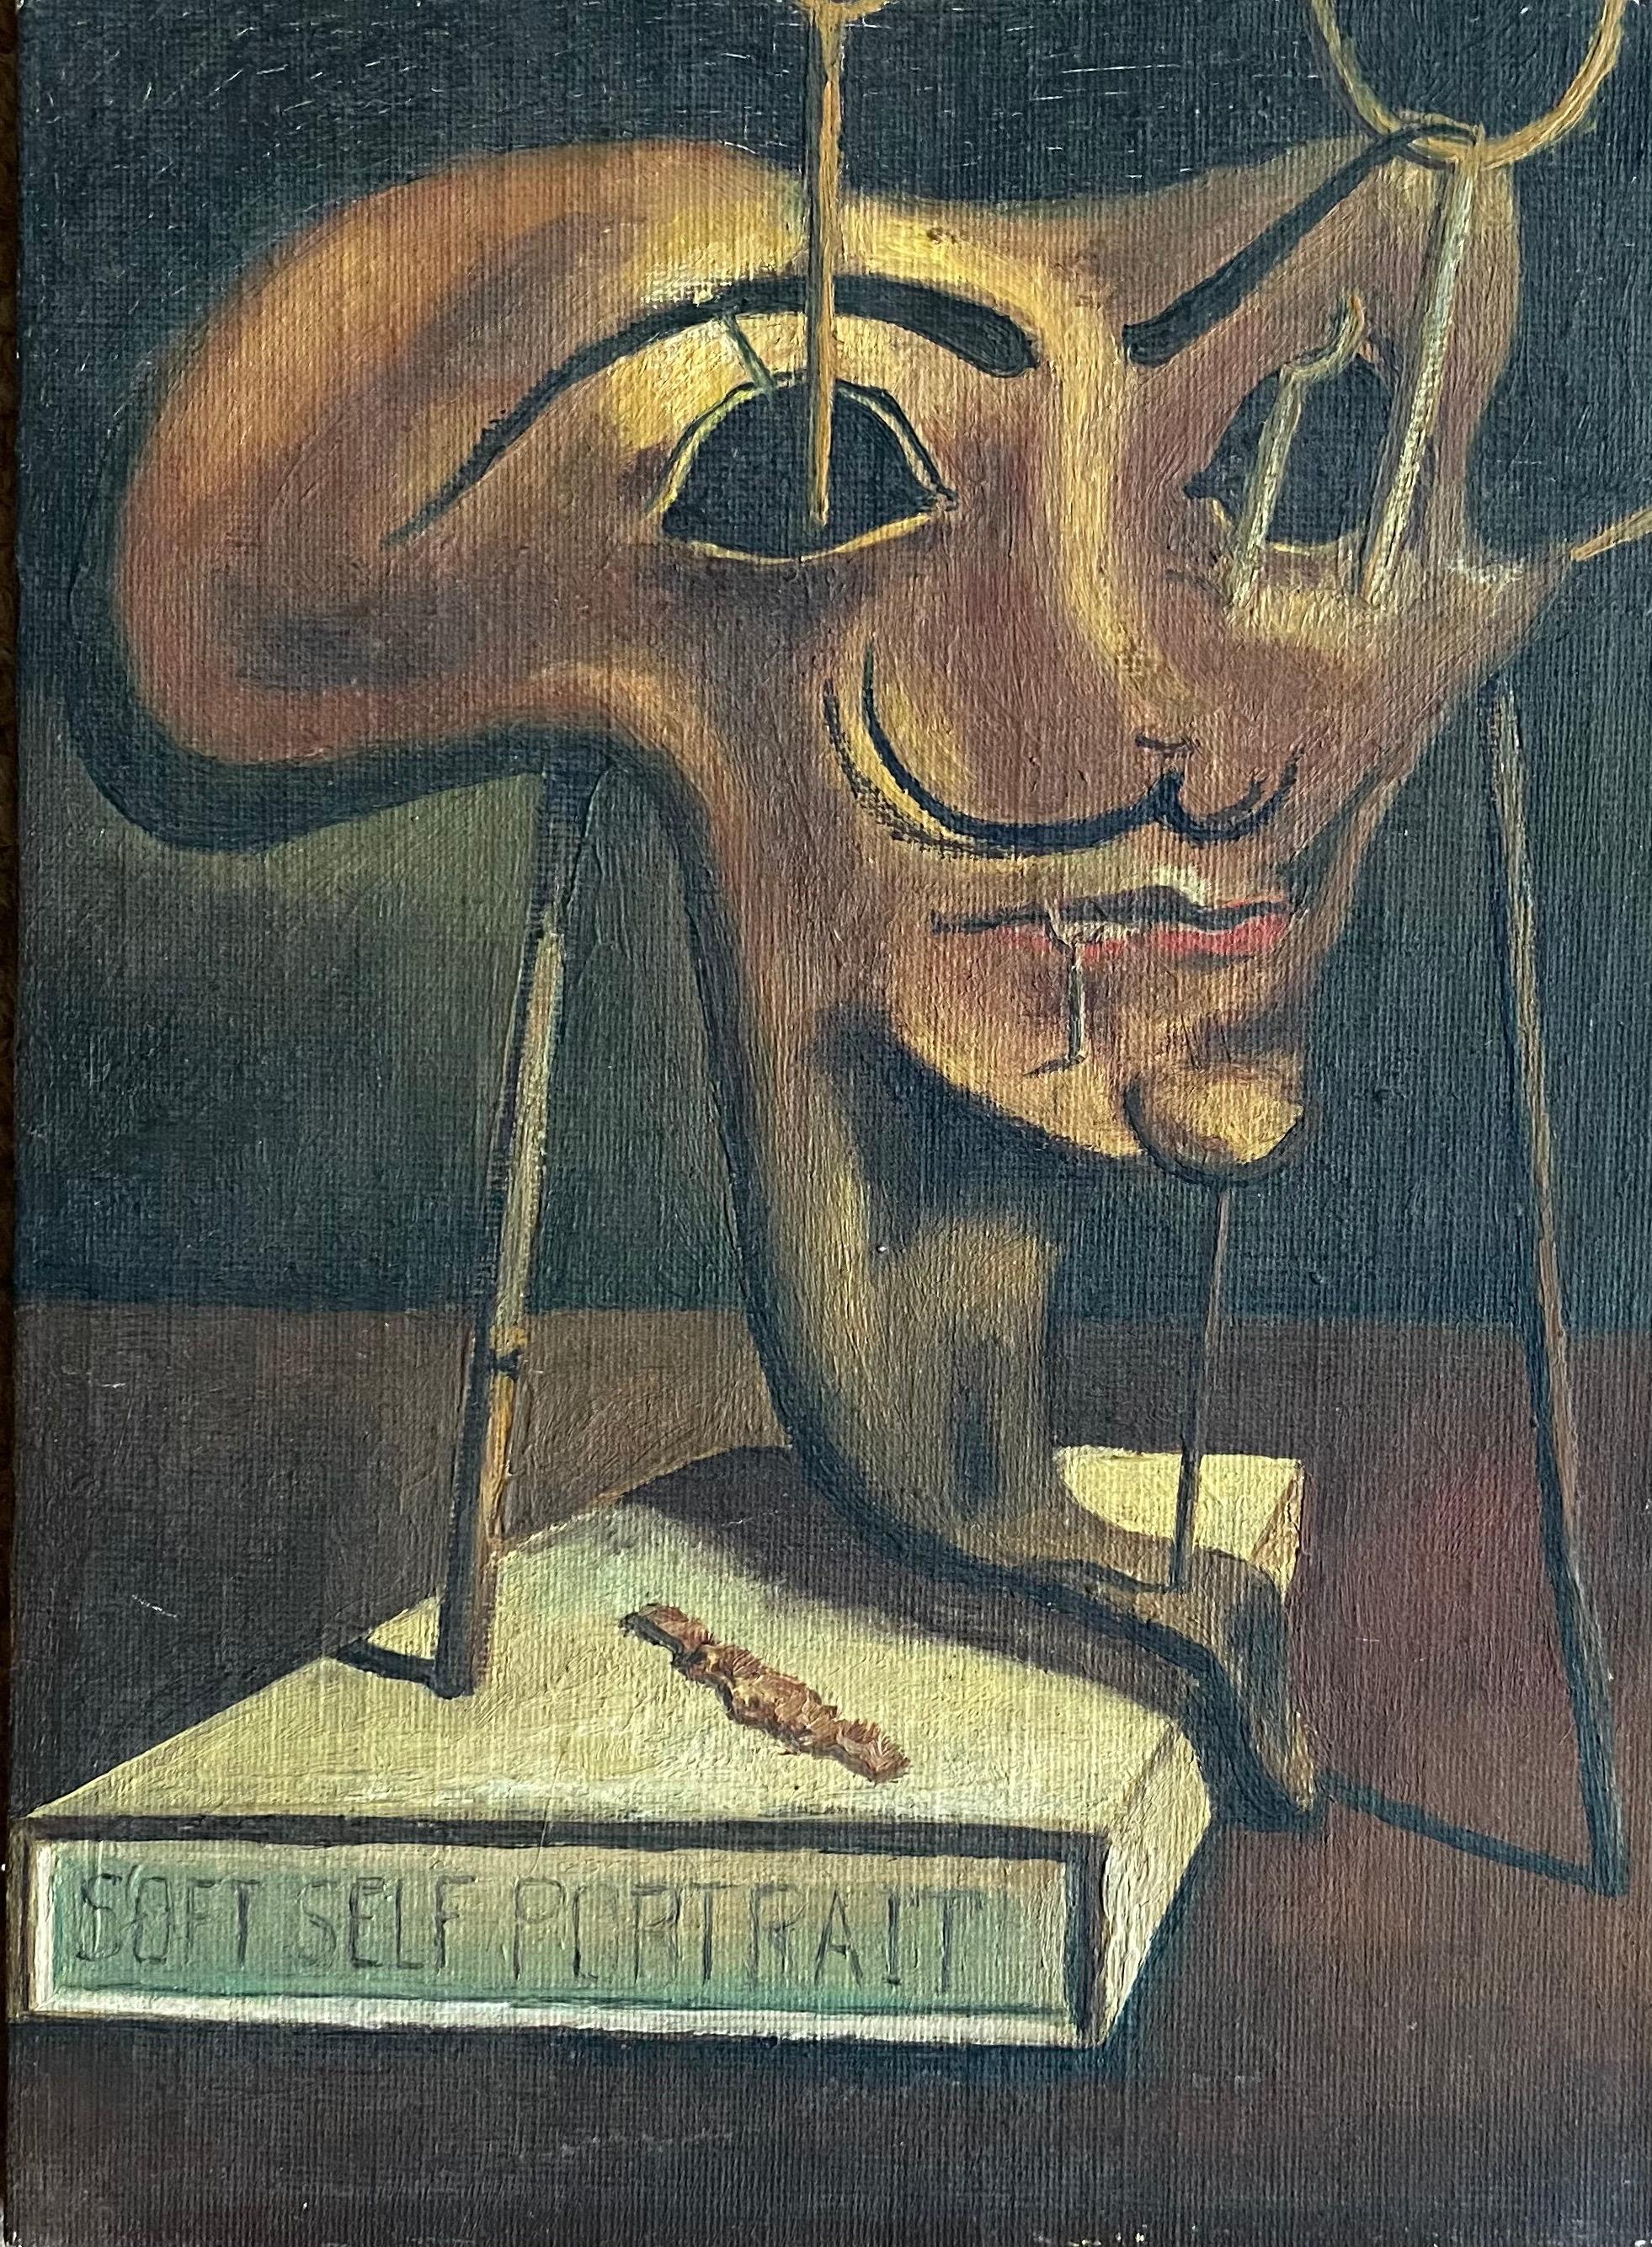 Salvador Dalí Portrait Painting - Mid 20th century Surrealist Oil Painting - The Mask with the Moustache